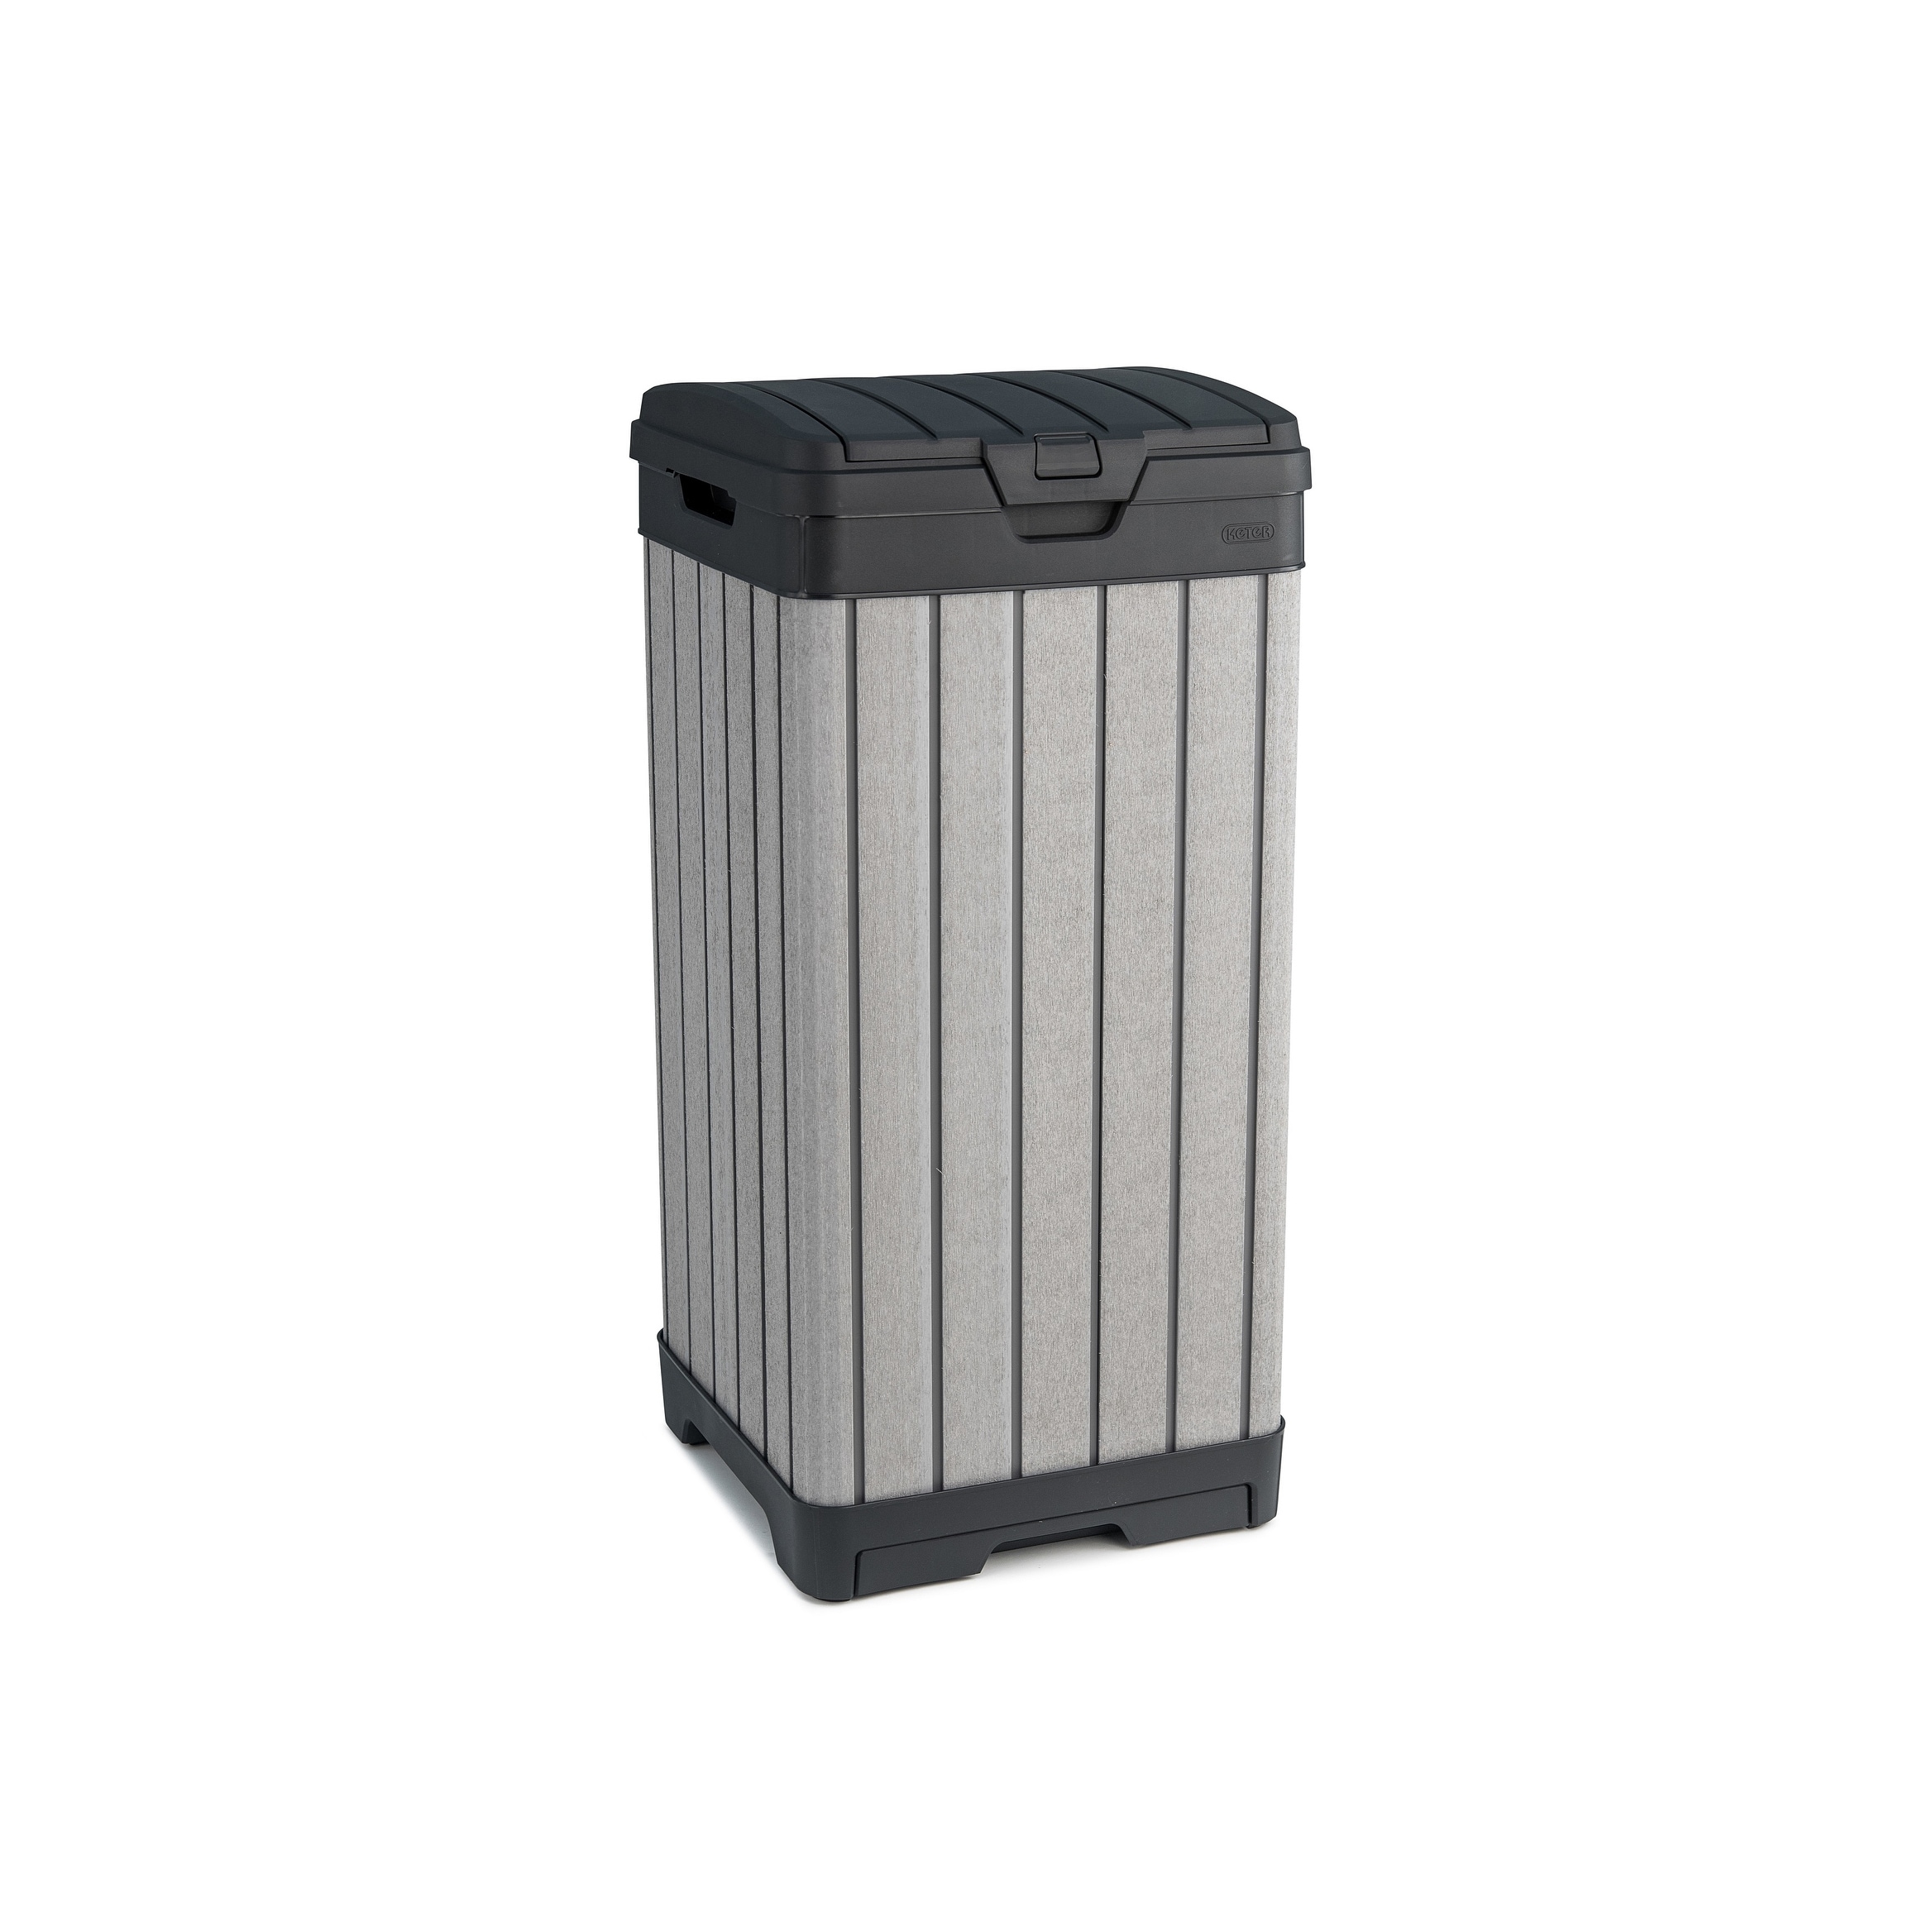 Keter Rockford Duotech Outdoor Trash Can, Gray